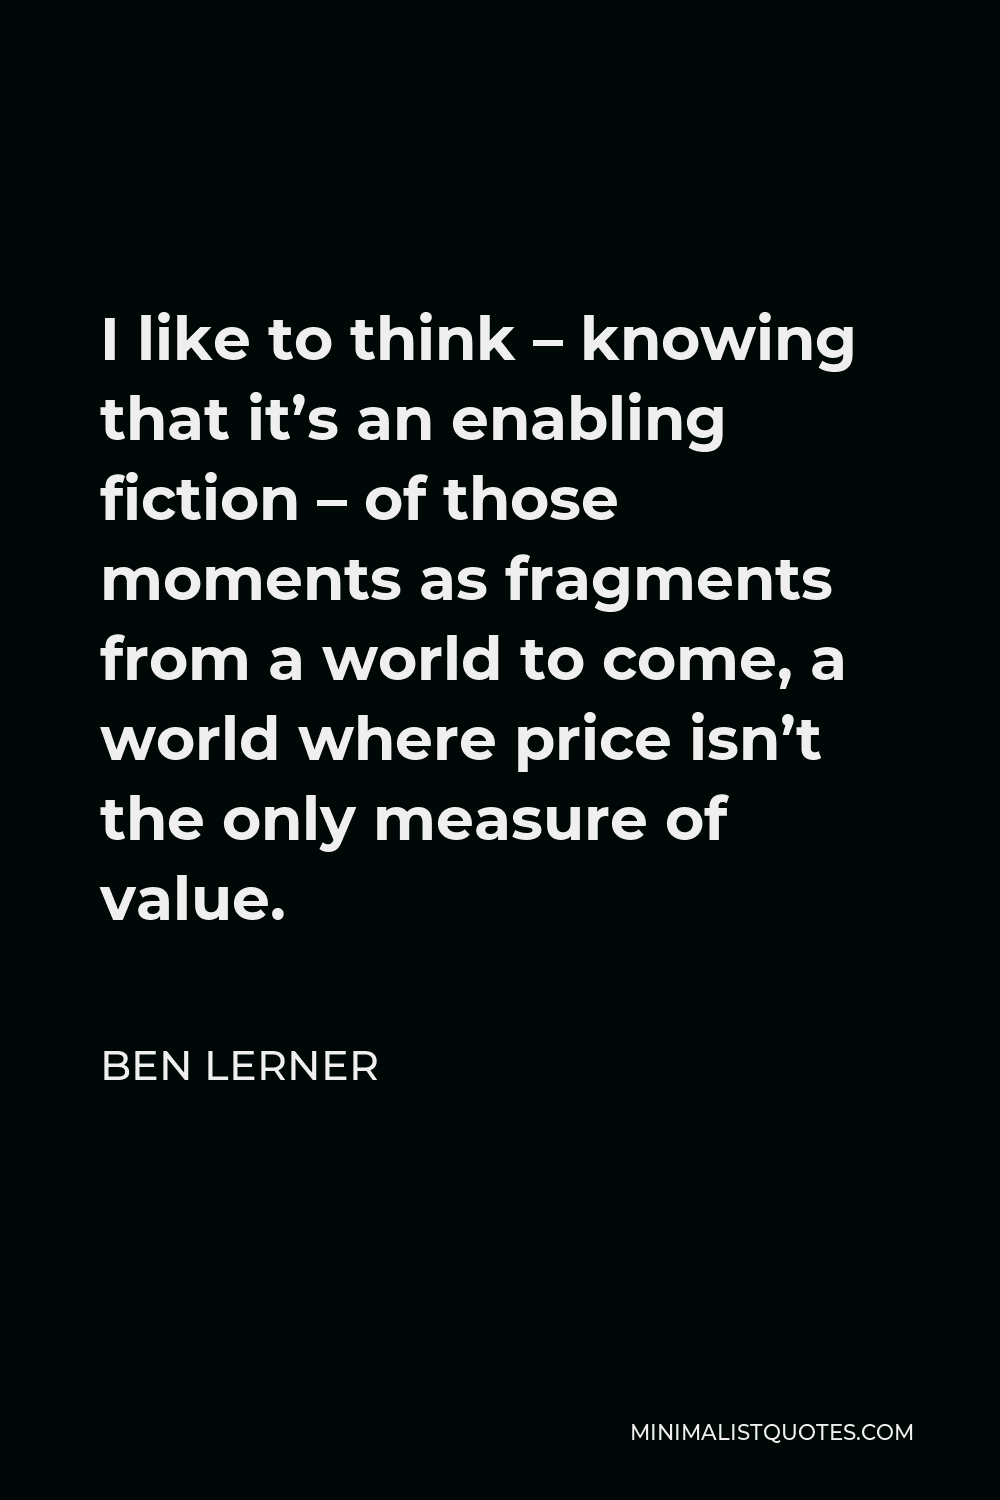 Ben Lerner Quote - I like to think – knowing that it’s an enabling fiction – of those moments as fragments from a world to come, a world where price isn’t the only measure of value.